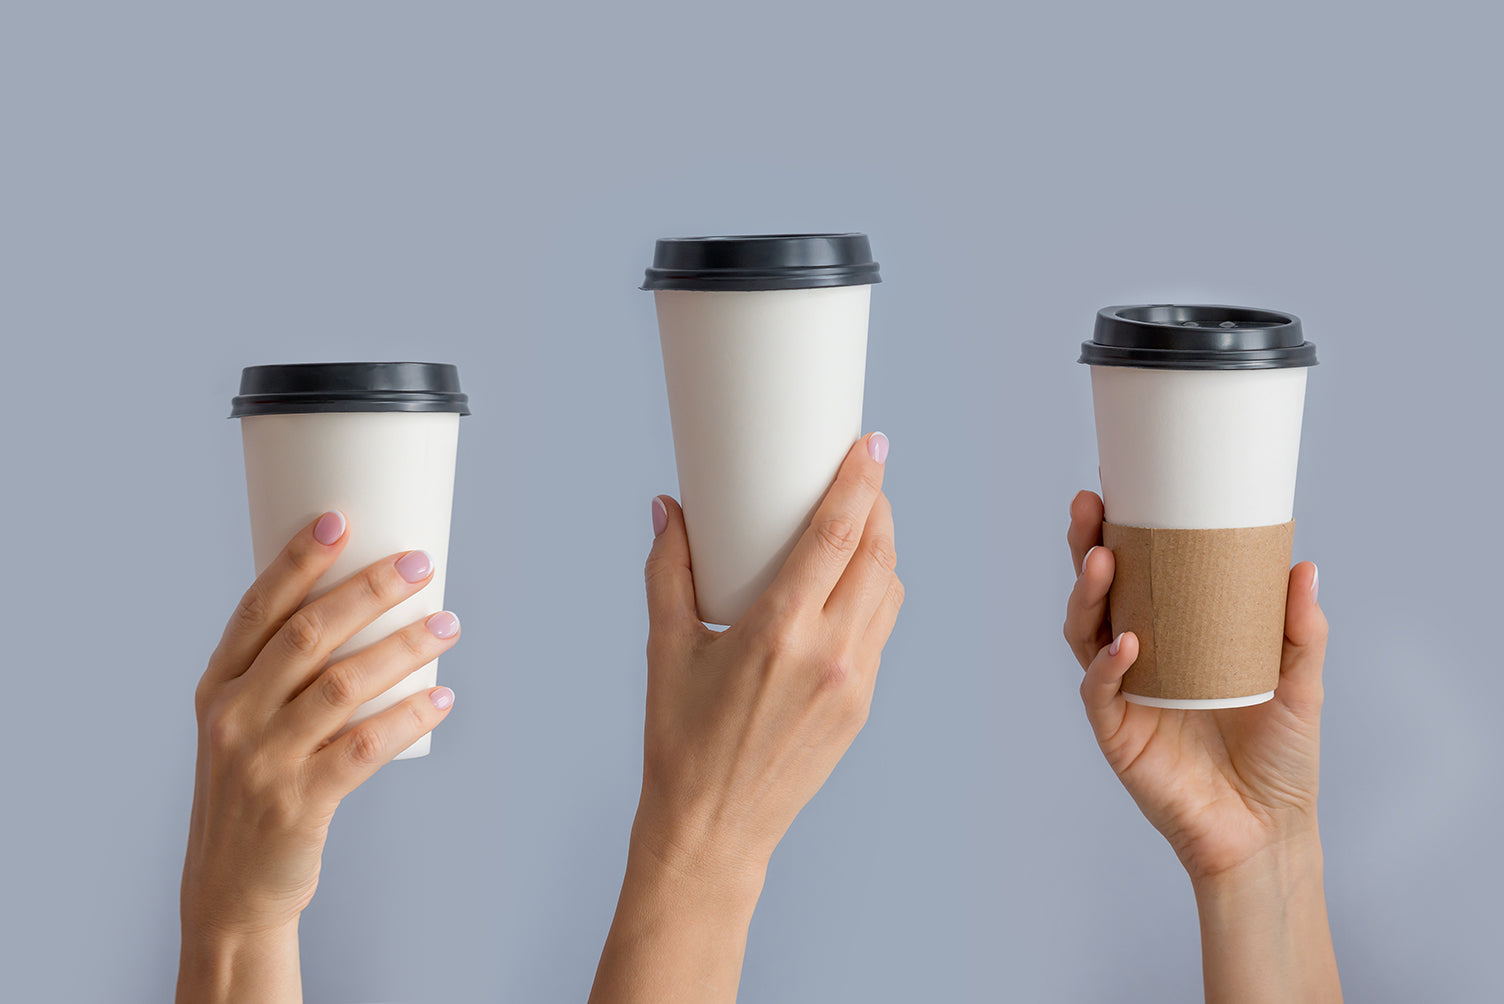 Will drinking hot coffee from paper cups harm your health?